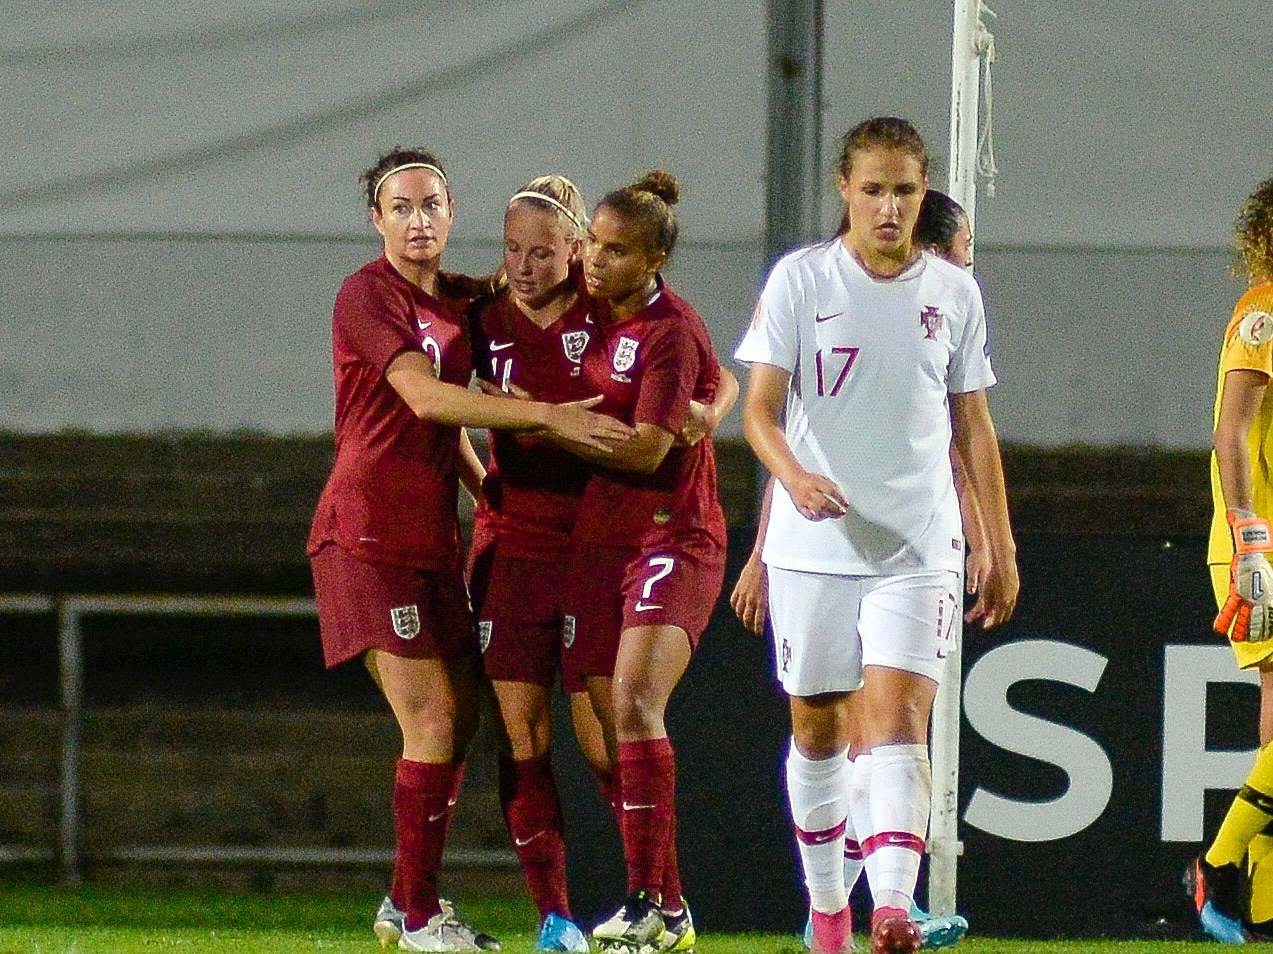 England celebrate after Beth Mead scores for the Lionesses